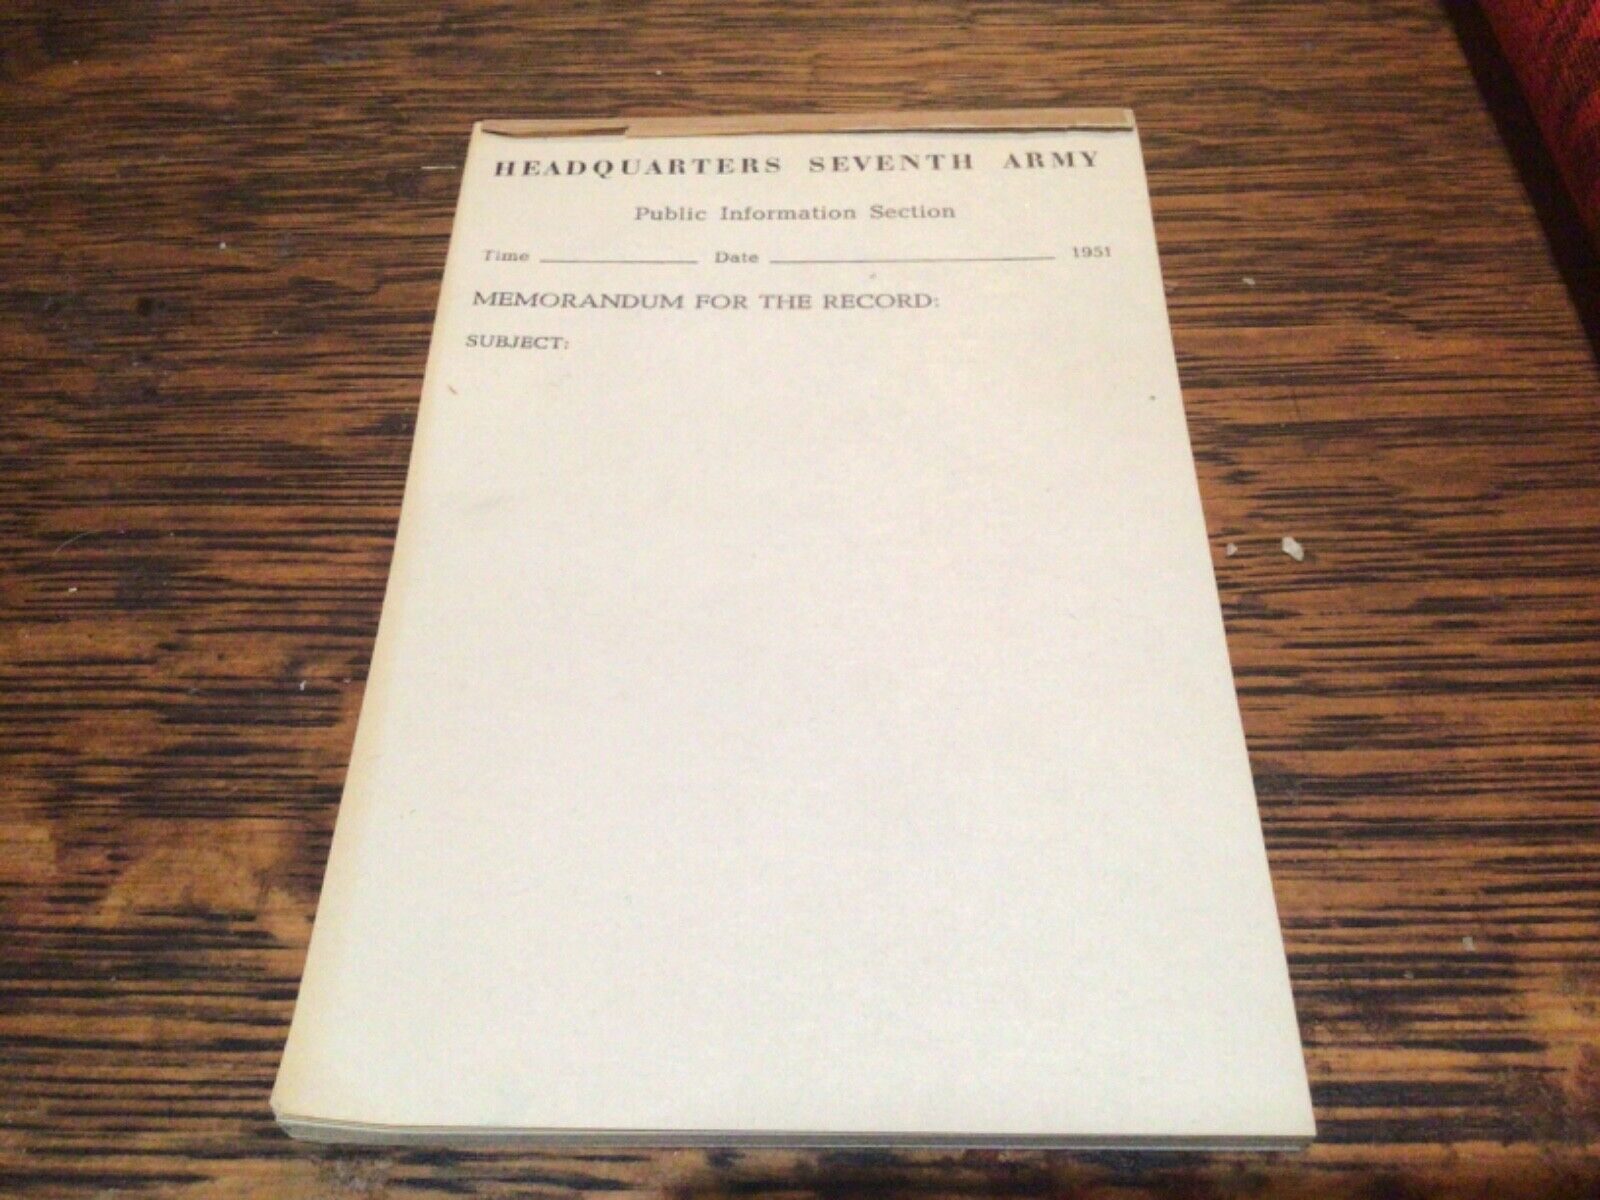 Headquarters Seventh Army Public Information Section Note Pad 1949